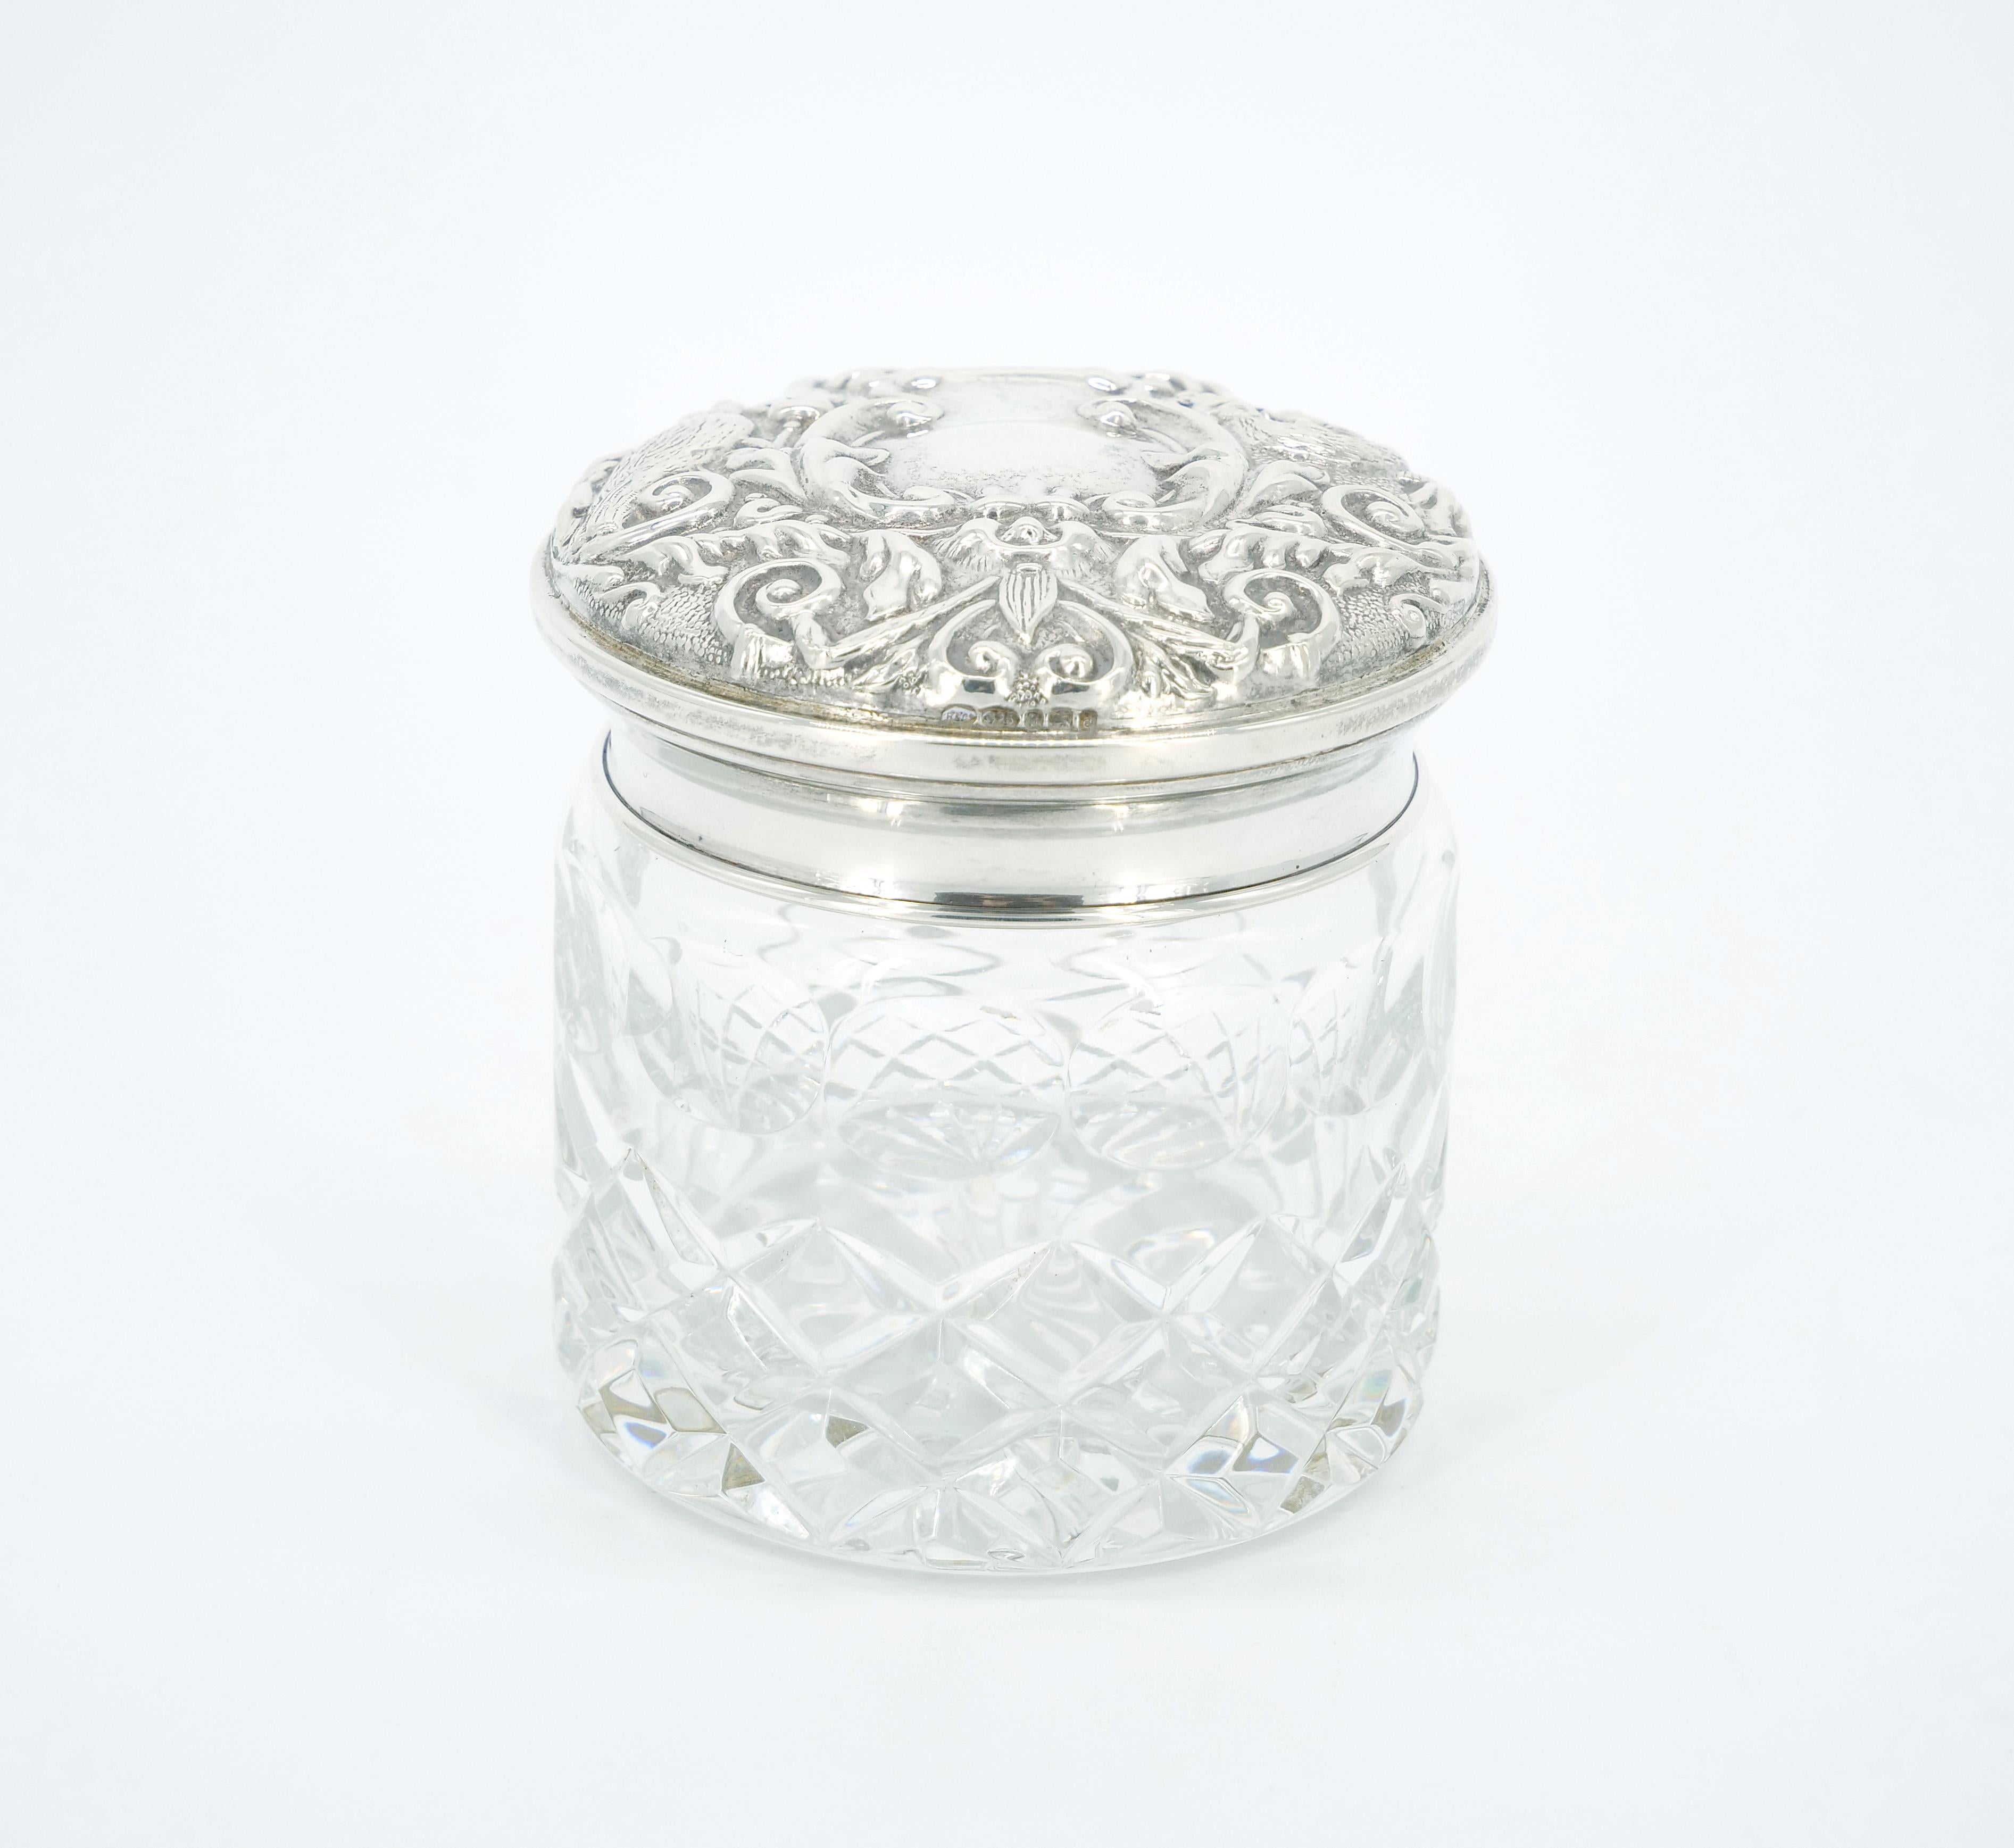 19th Century English Sterling Silver Lidded Top / Cut Glass Covered Piece For Sale 3